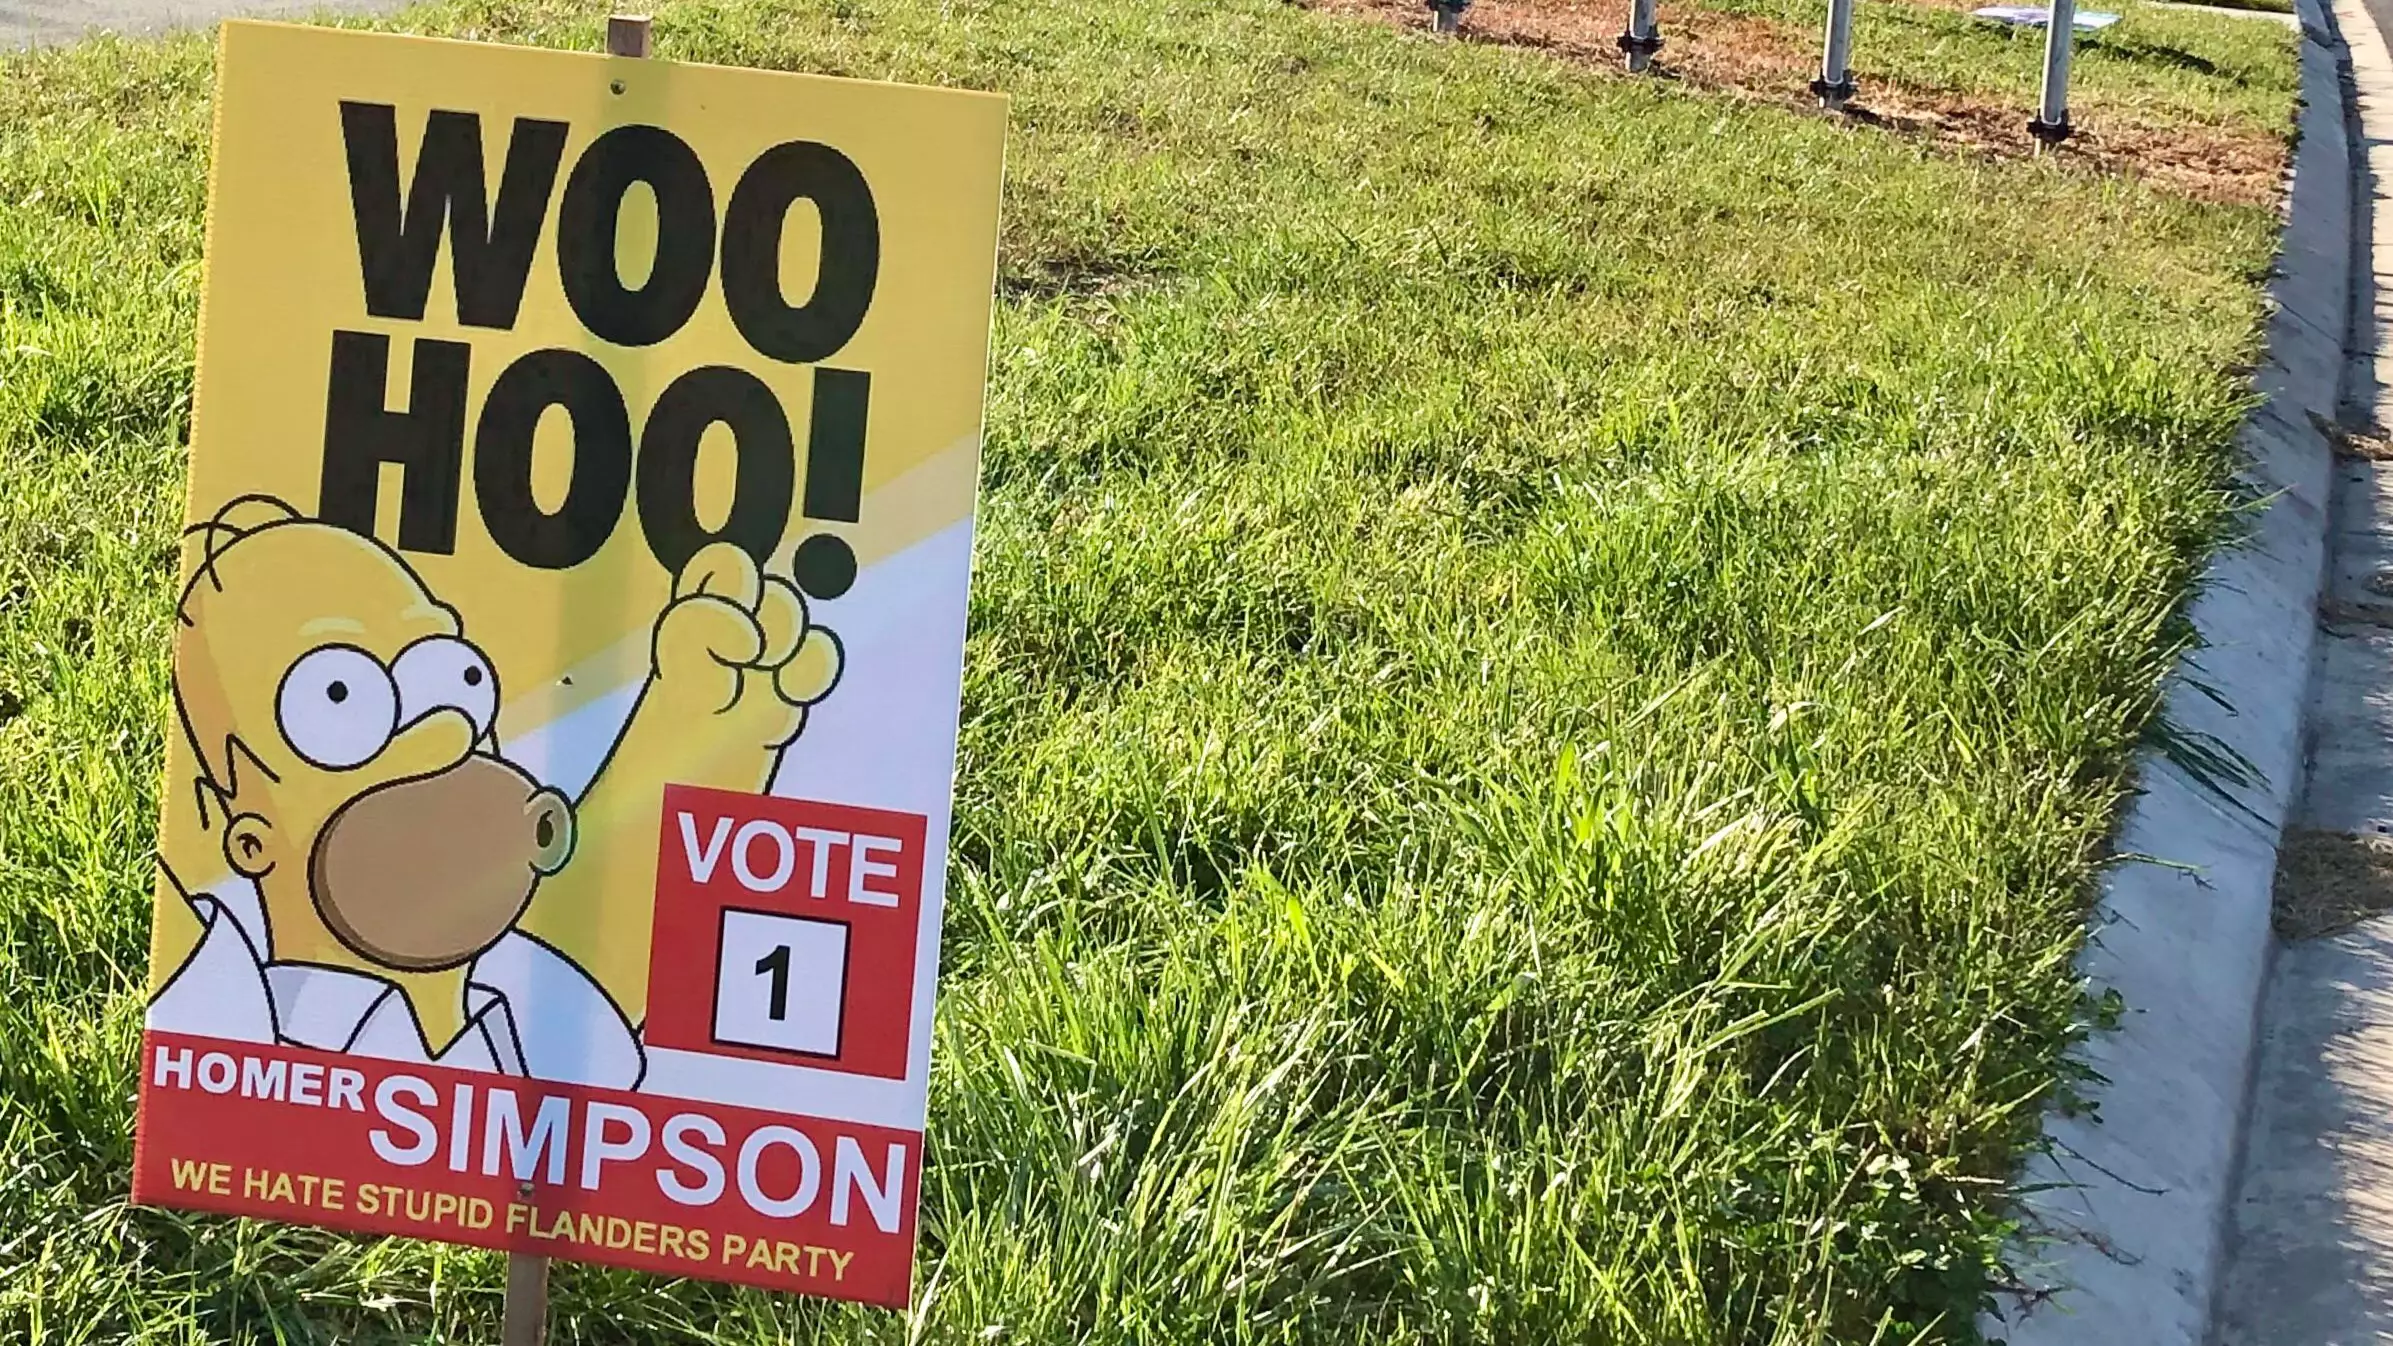 Vote For Homer Simpson Signs Are Popping Up In Canberra Ahead Of Election